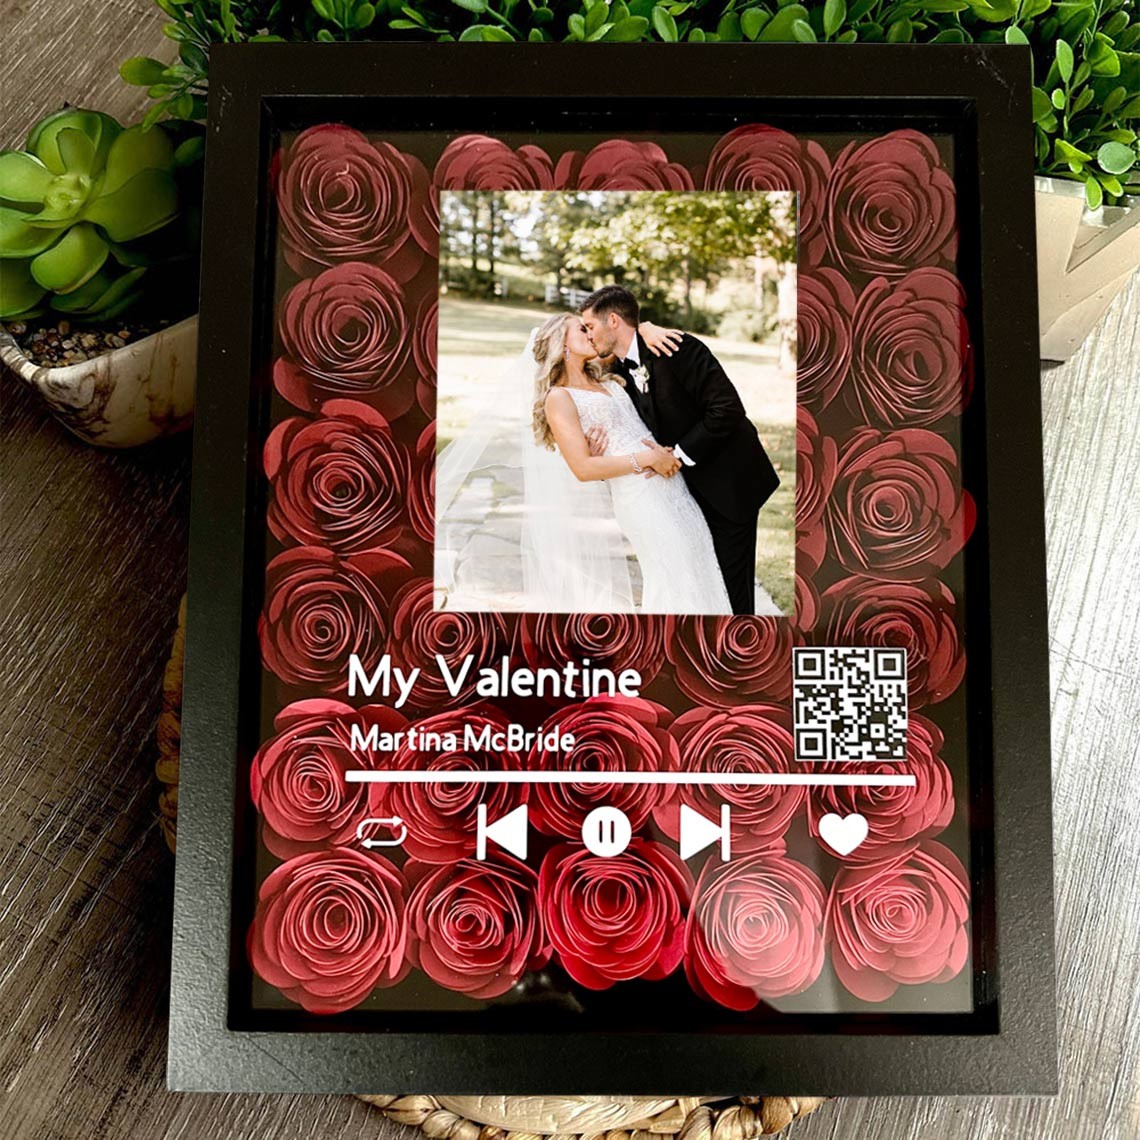 Personalized Spotify Song Photo Flower Shadow Box Gifts for Her Valentine's Day Gift Ideas for Girlfriend Wife